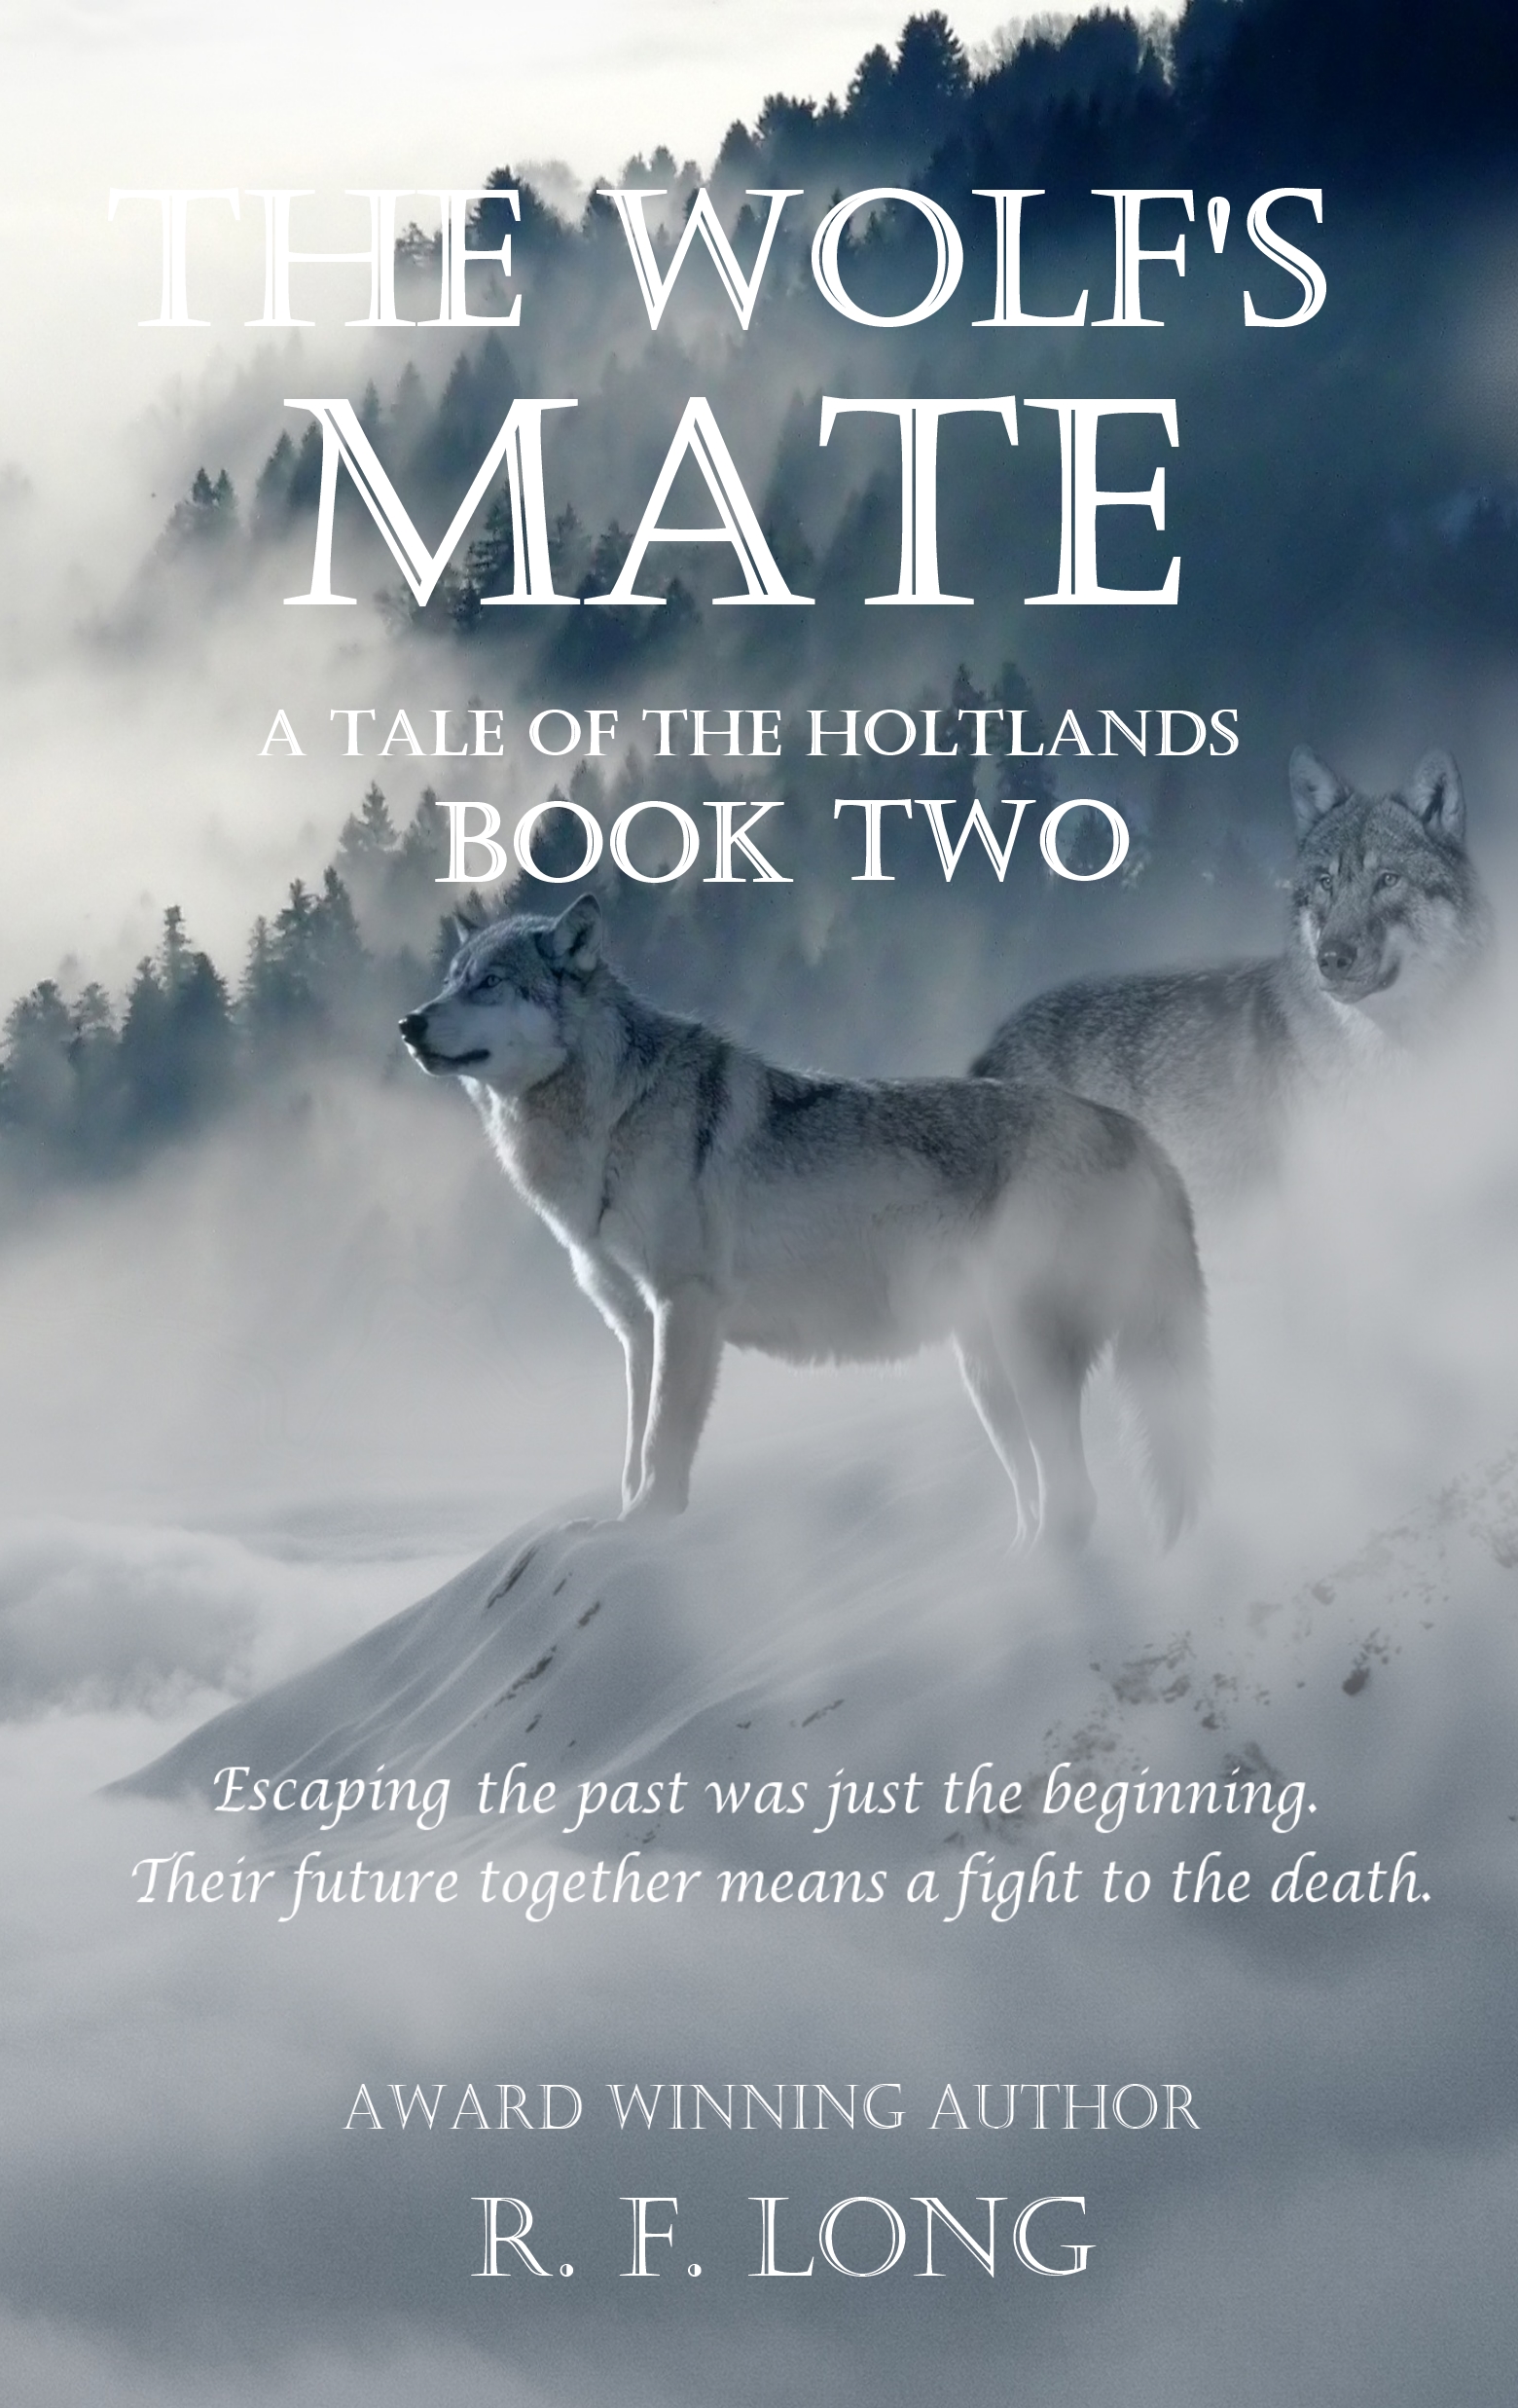 The Wolf's Mate